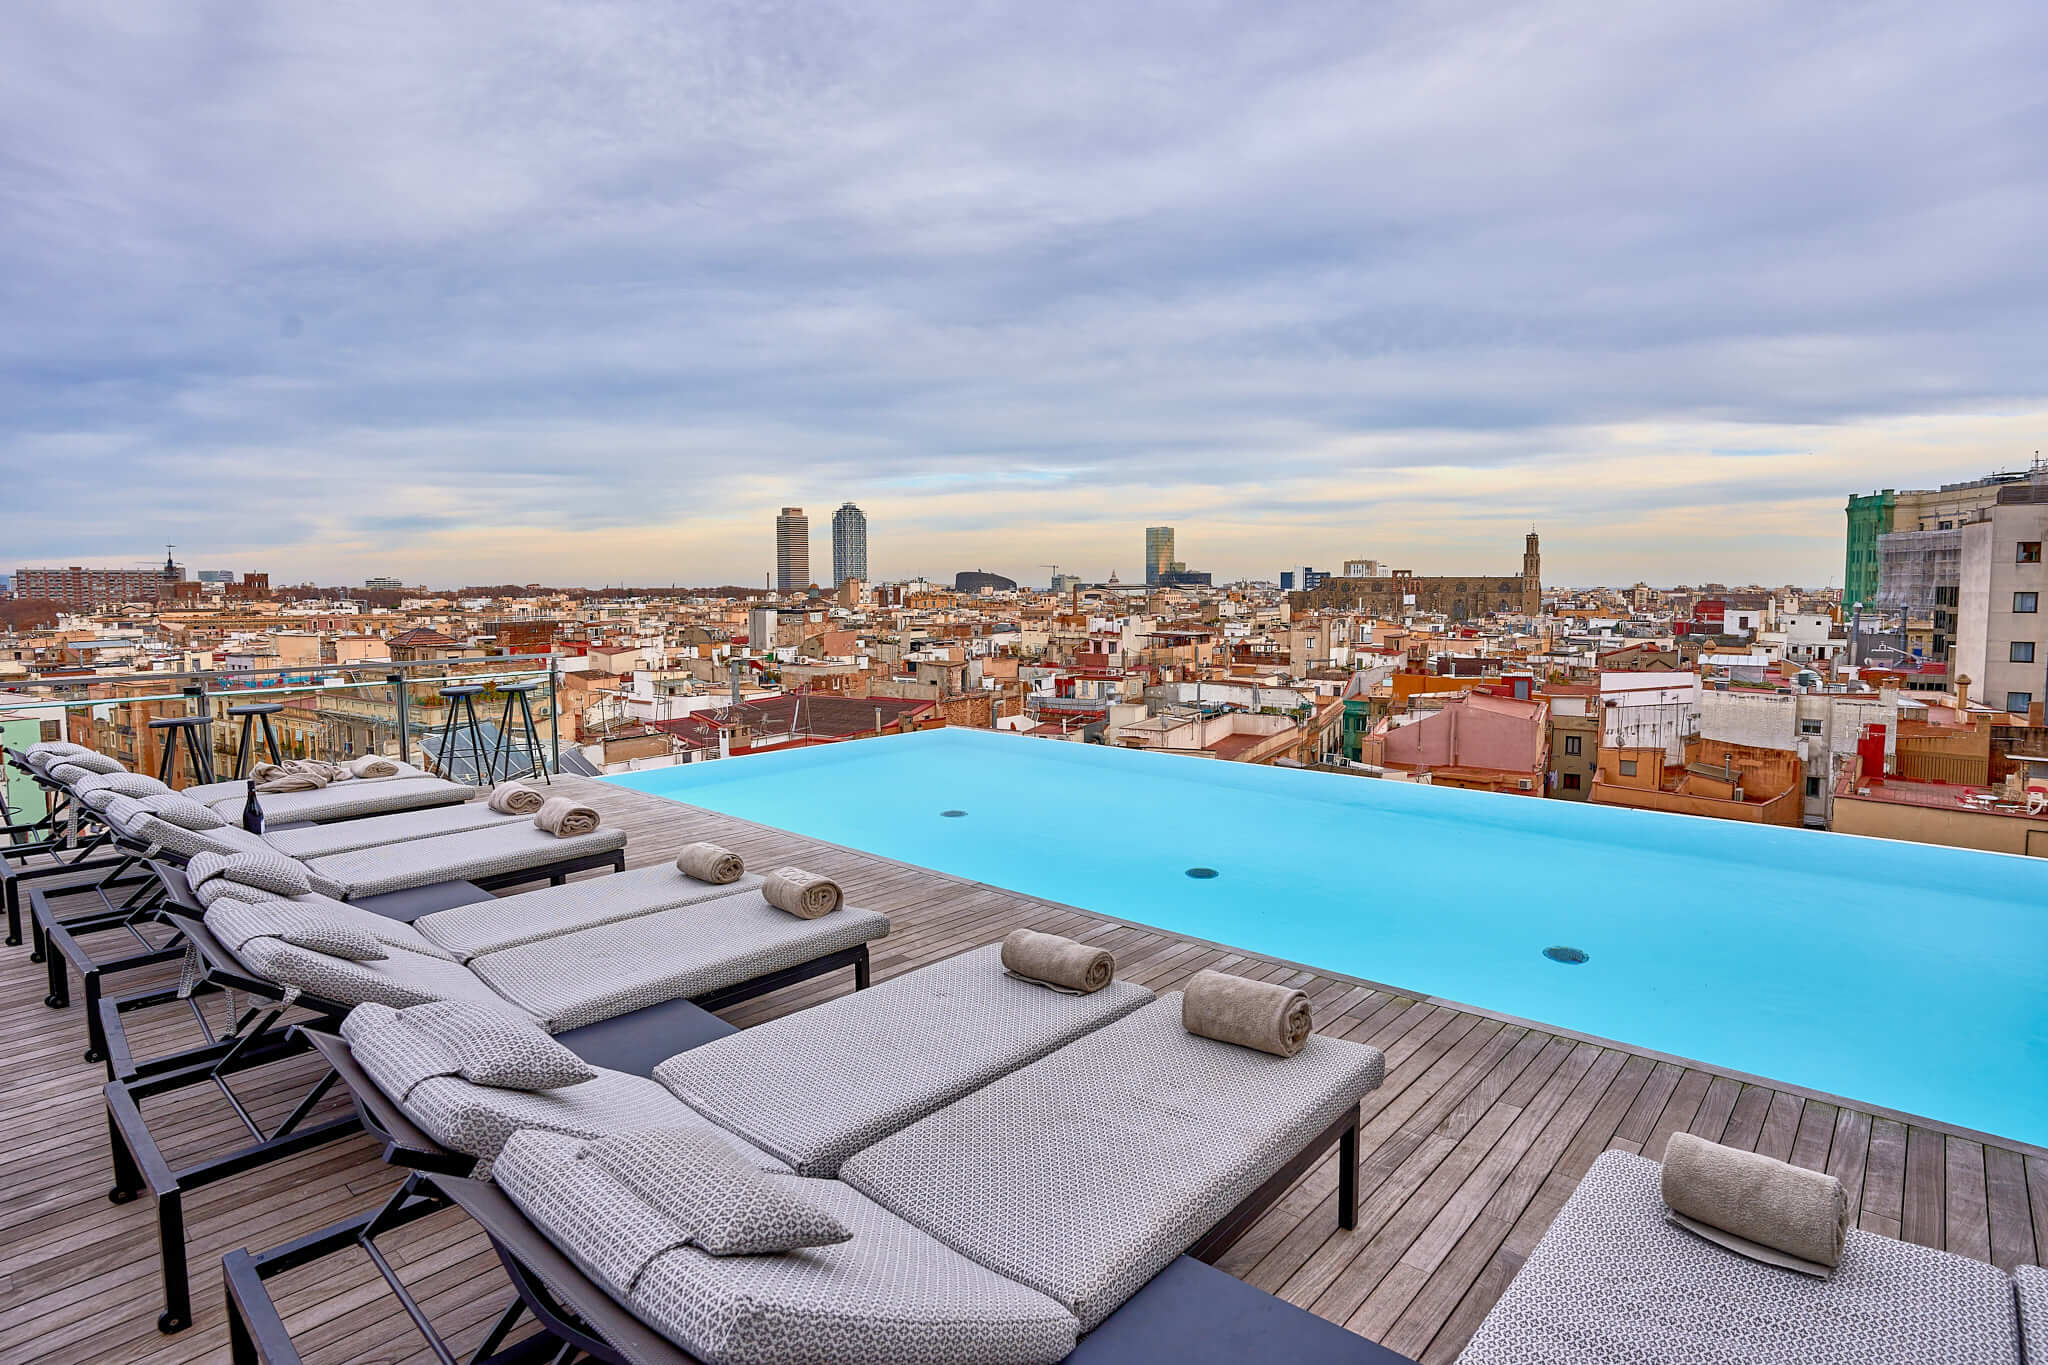 Barcelona’s Best Rooftop Bars and Terraces for Cocktails and Relaxation